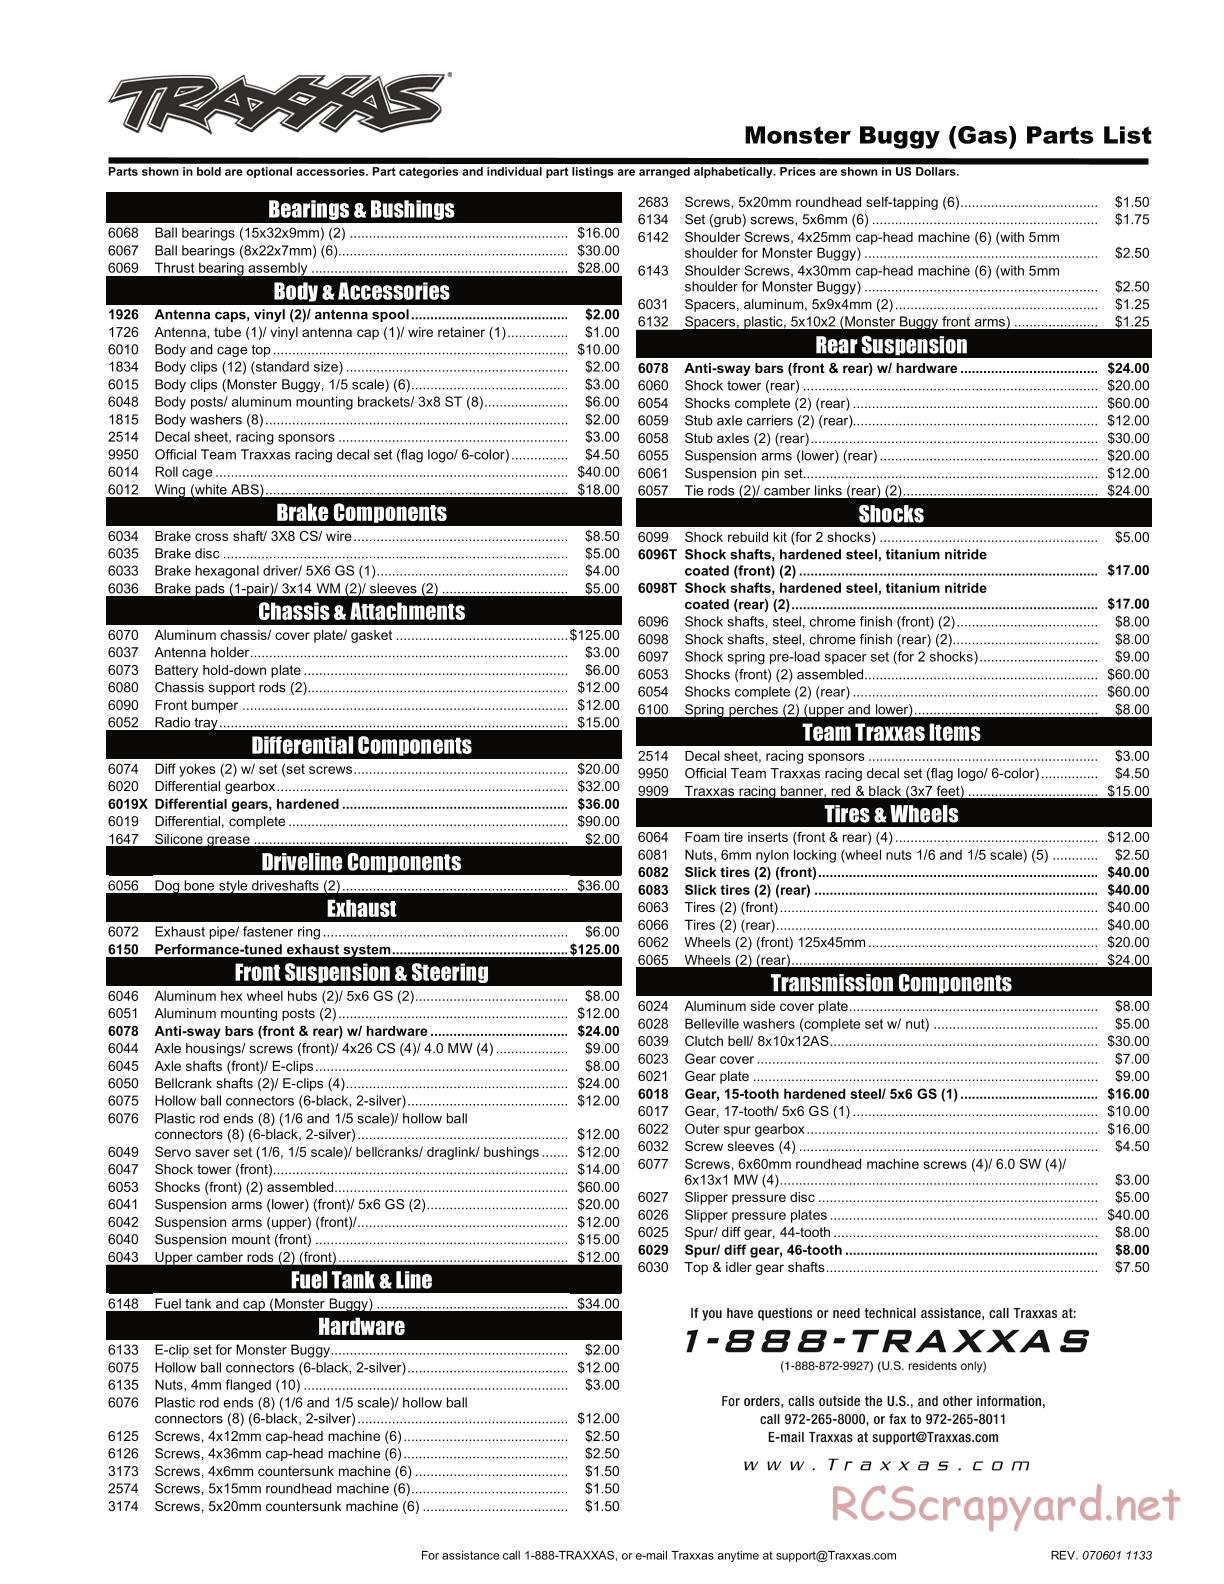 Traxxas - Monster Buggy (Gas Buggy) (1993) - Parts List - Page 1